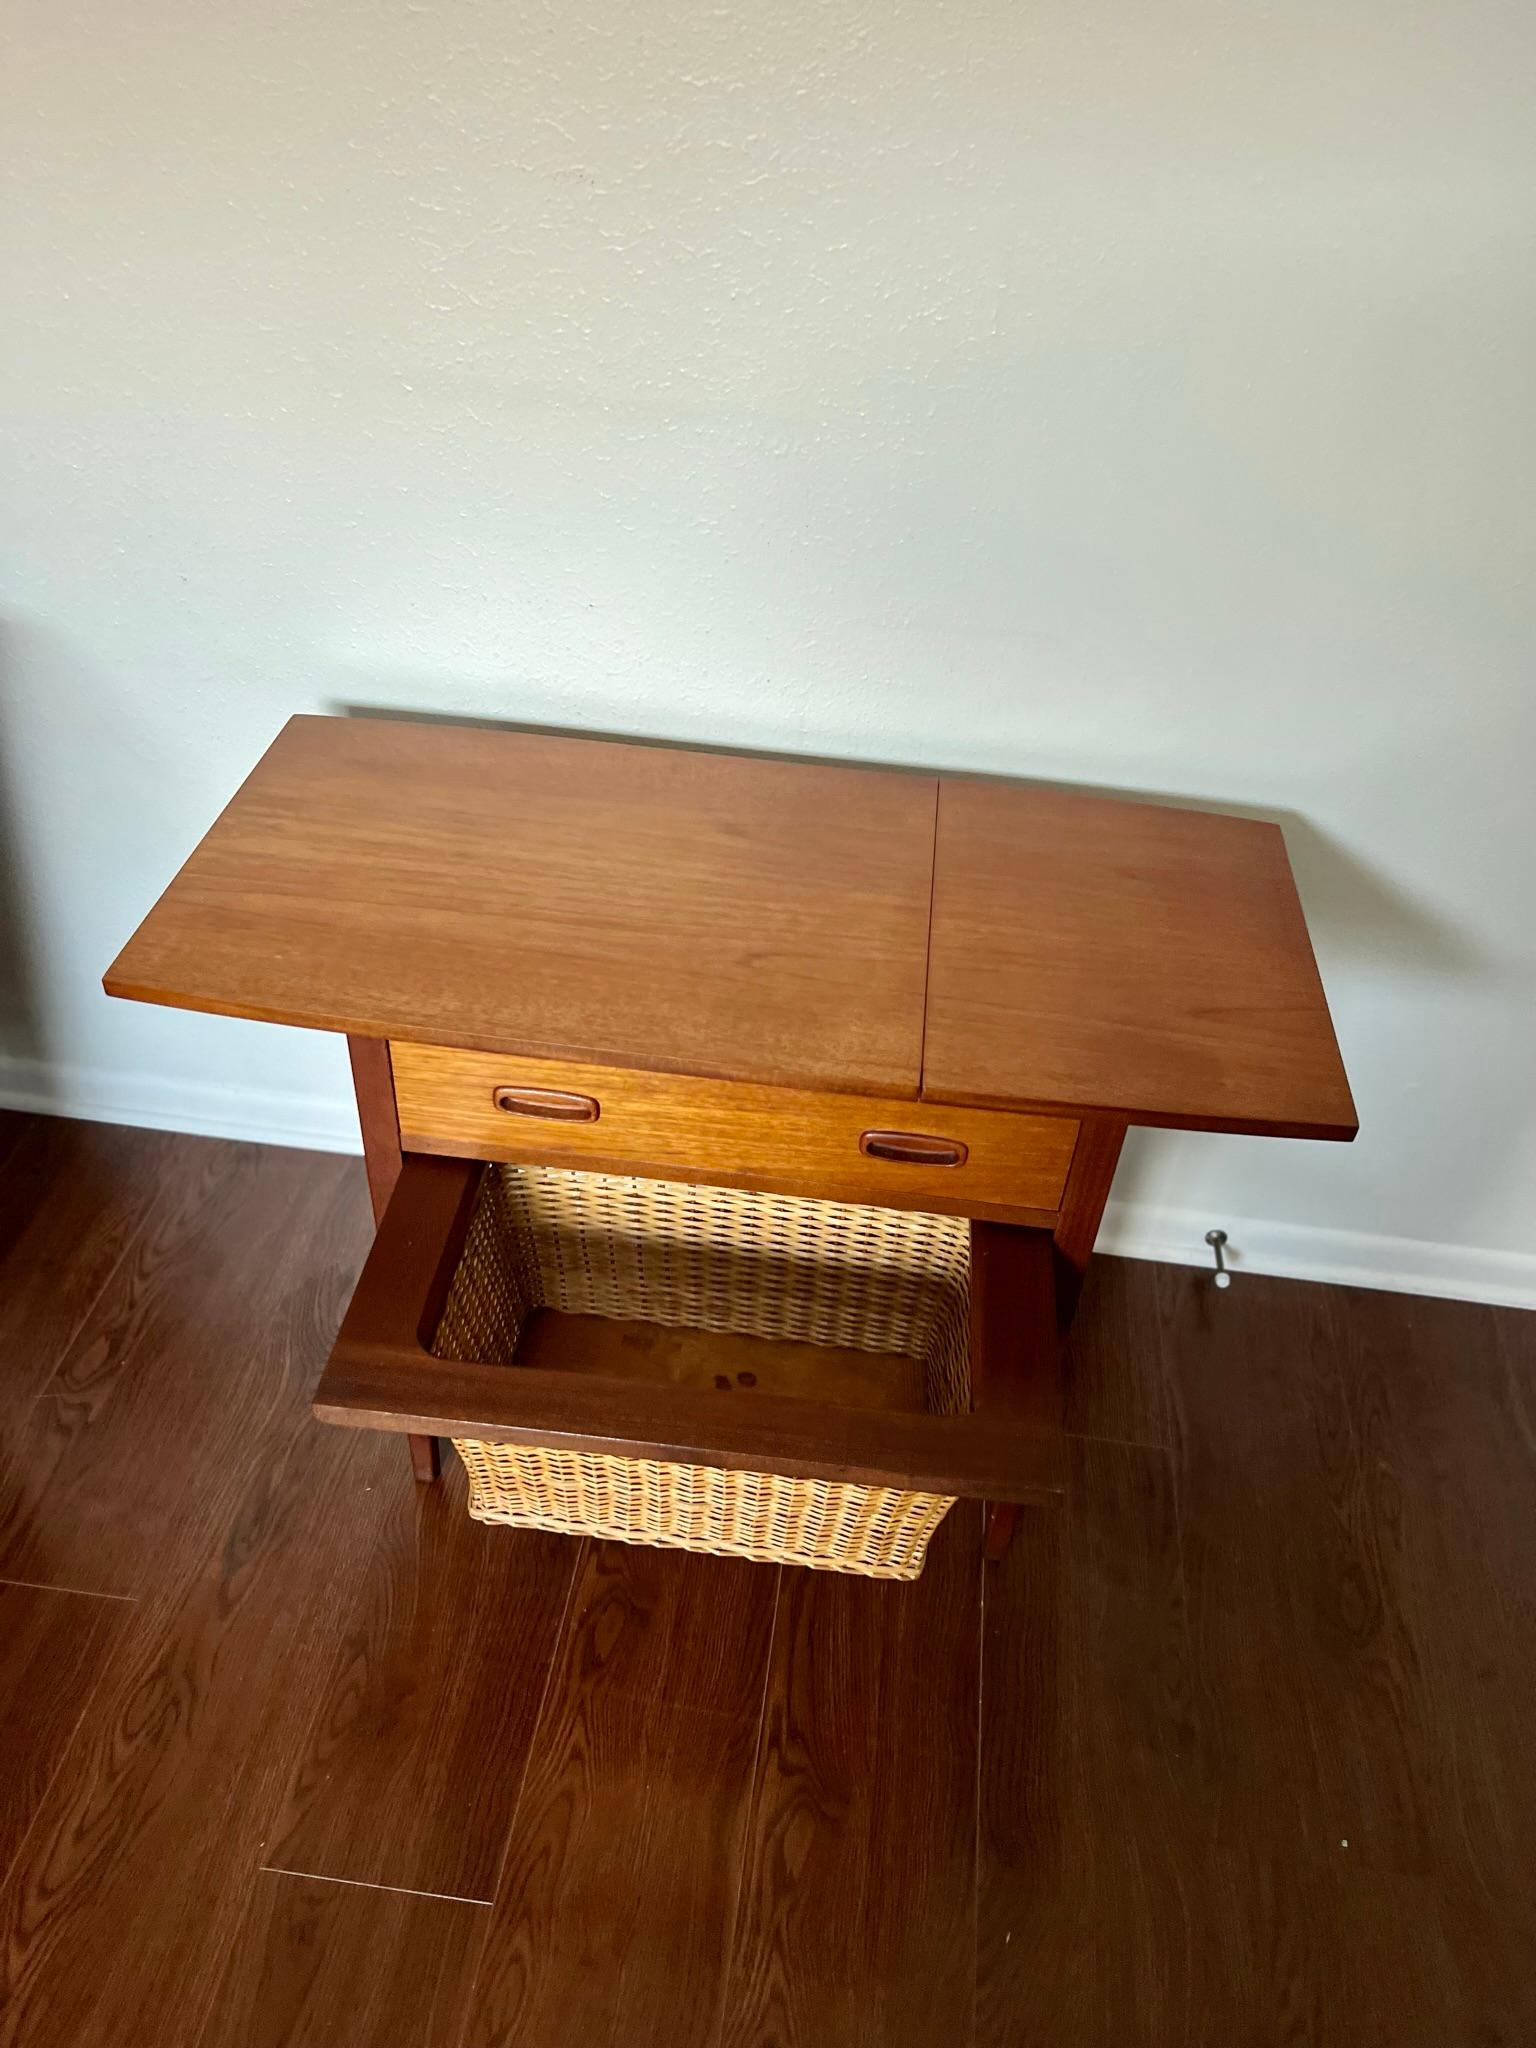 Mid-20th Century Lovely Teak Veneered Sewing Box from the 1960s, Unmarked